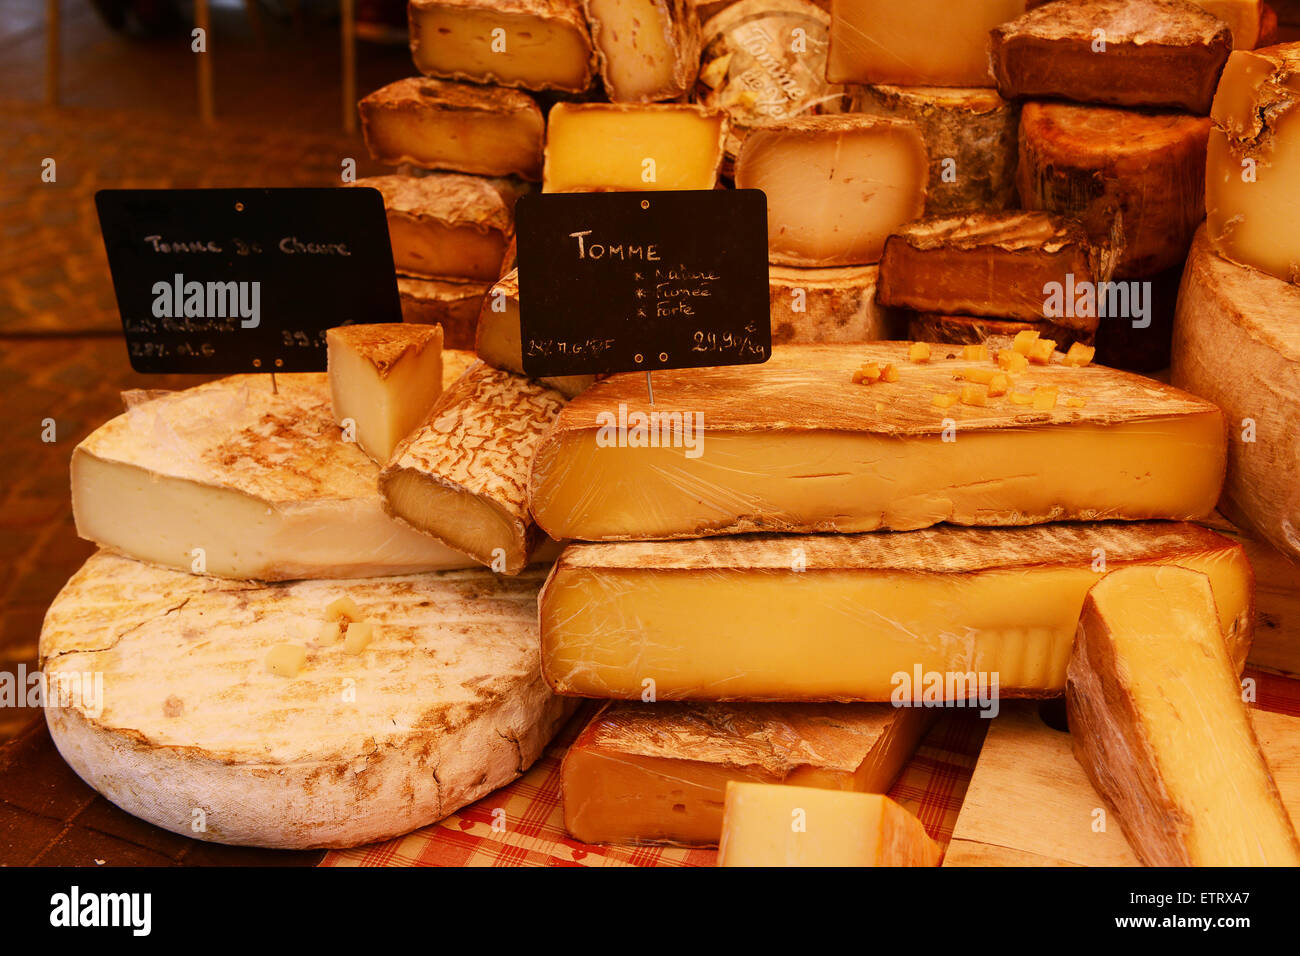 Hand made cheese cheeses on sale at French market in France Stock Photo